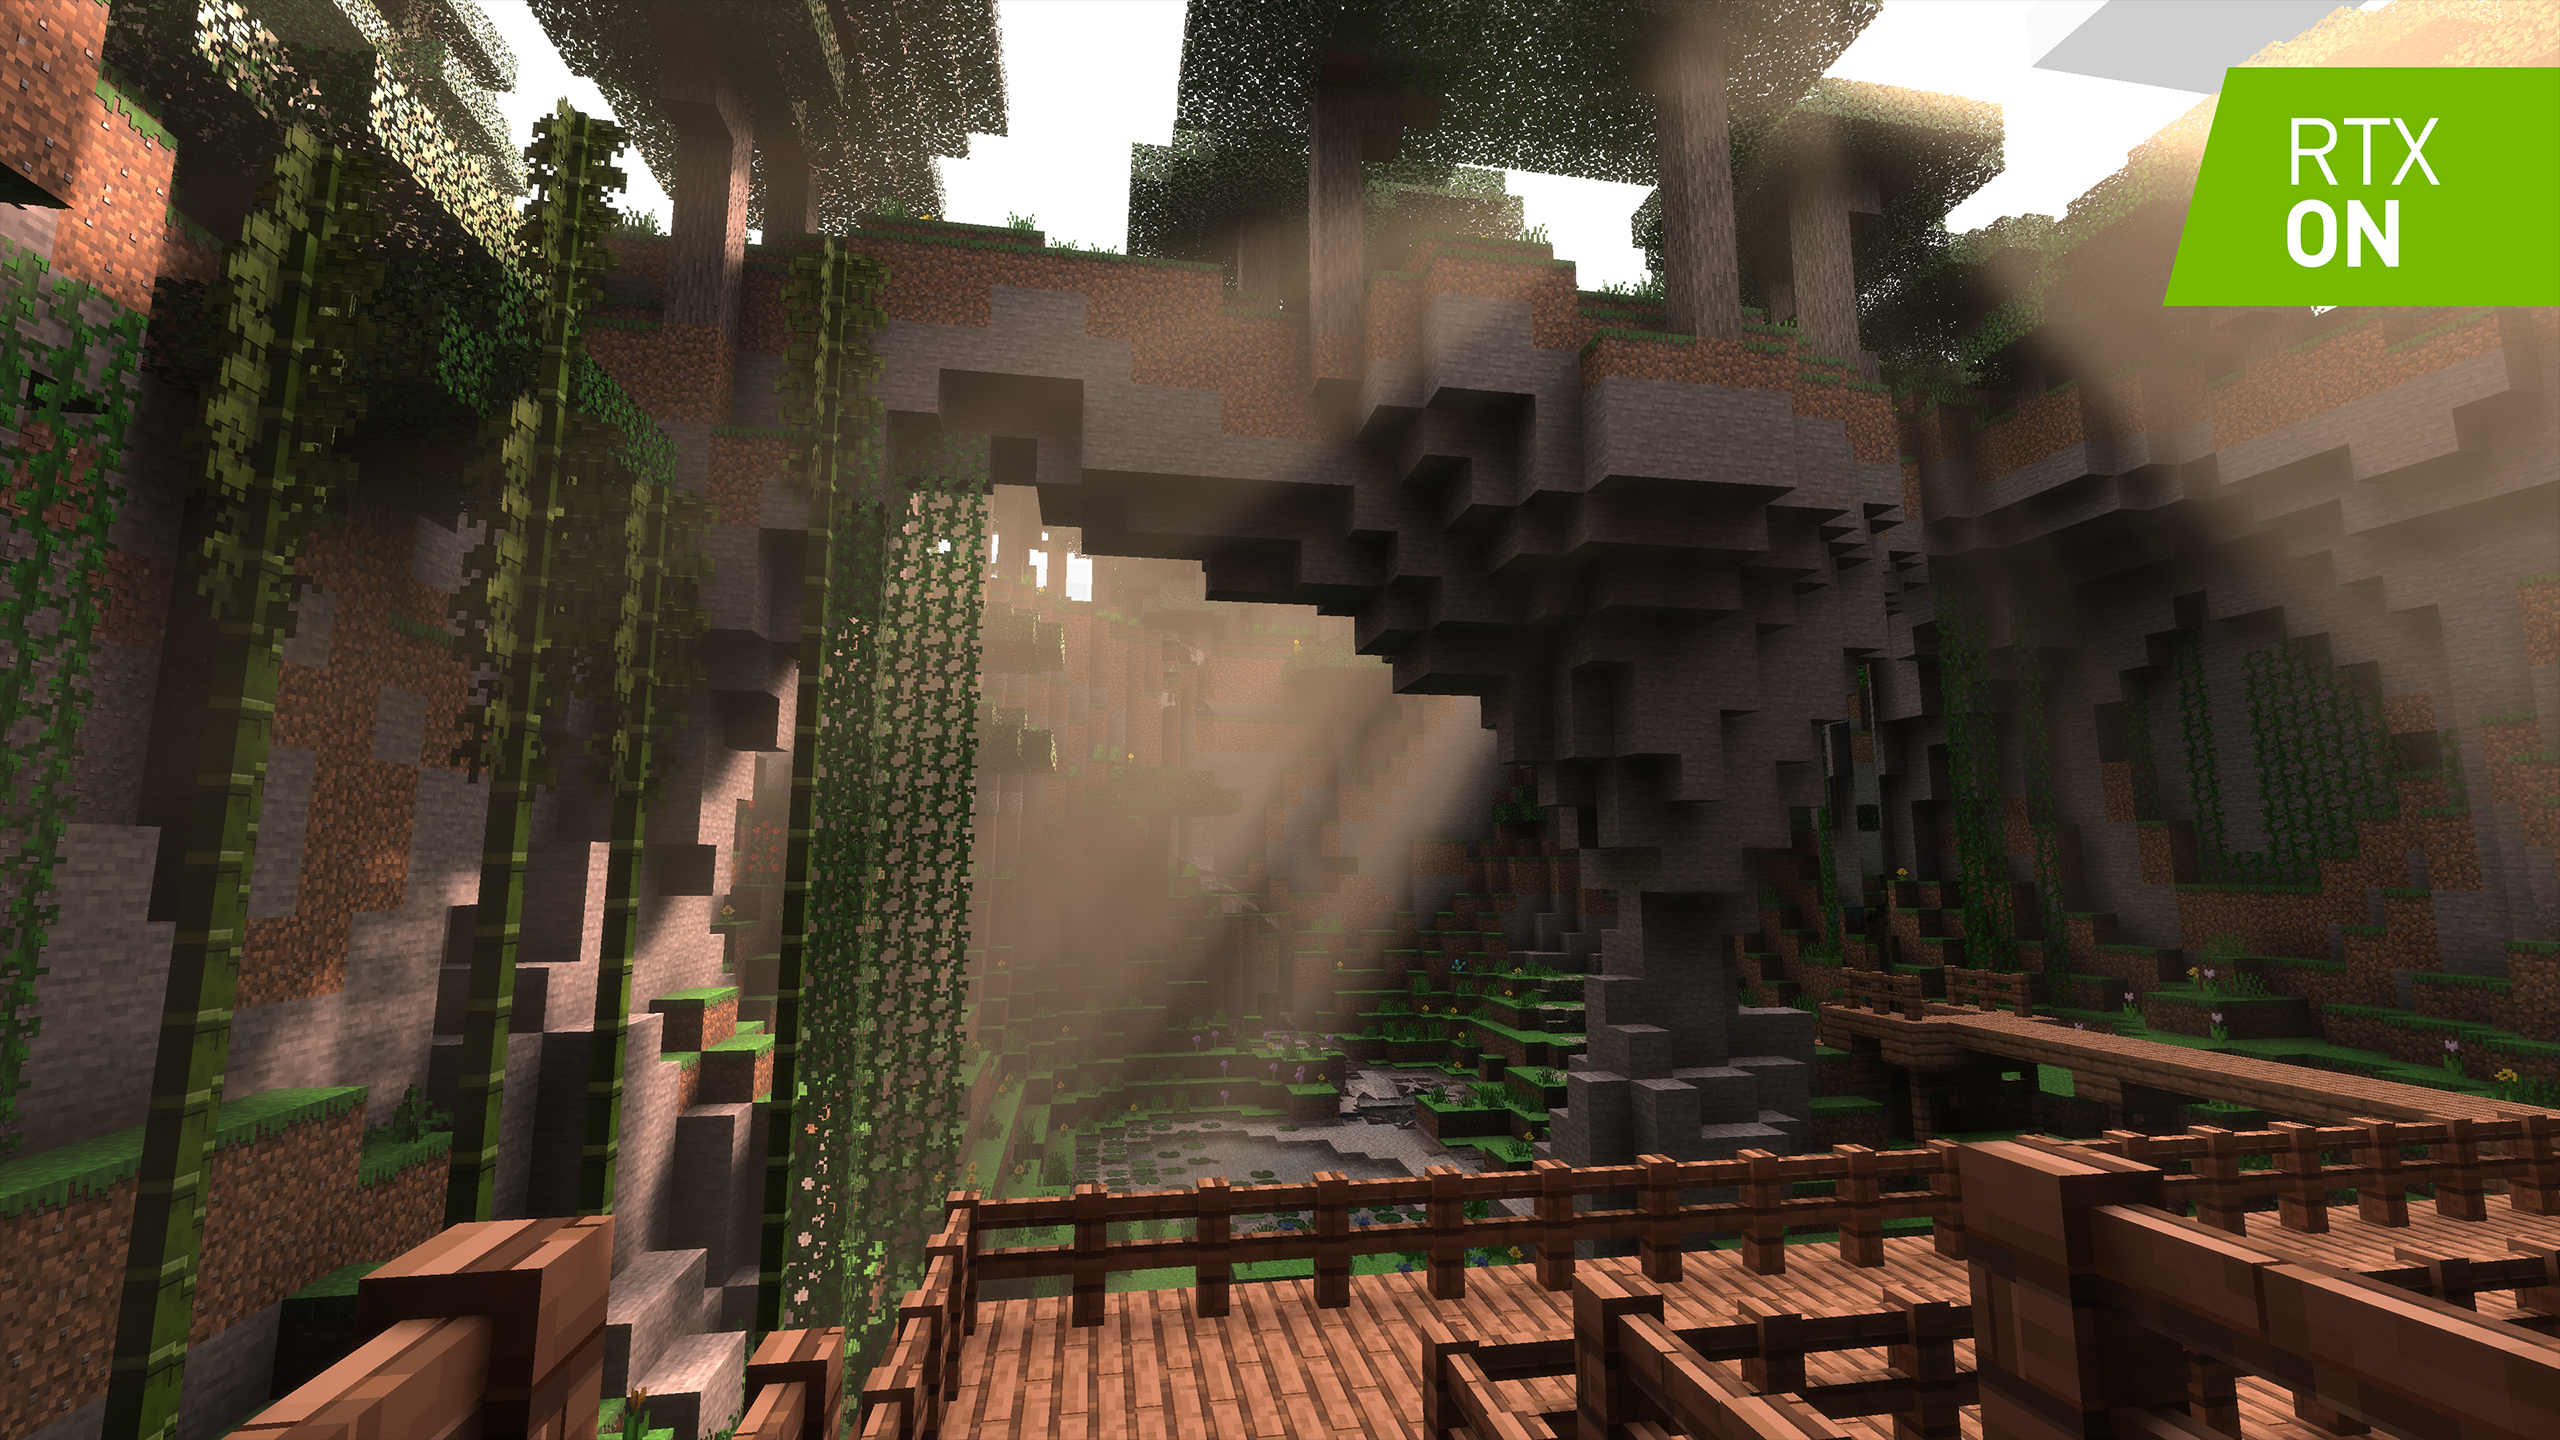 Ray traced sun rays seen through trees in Minecraft